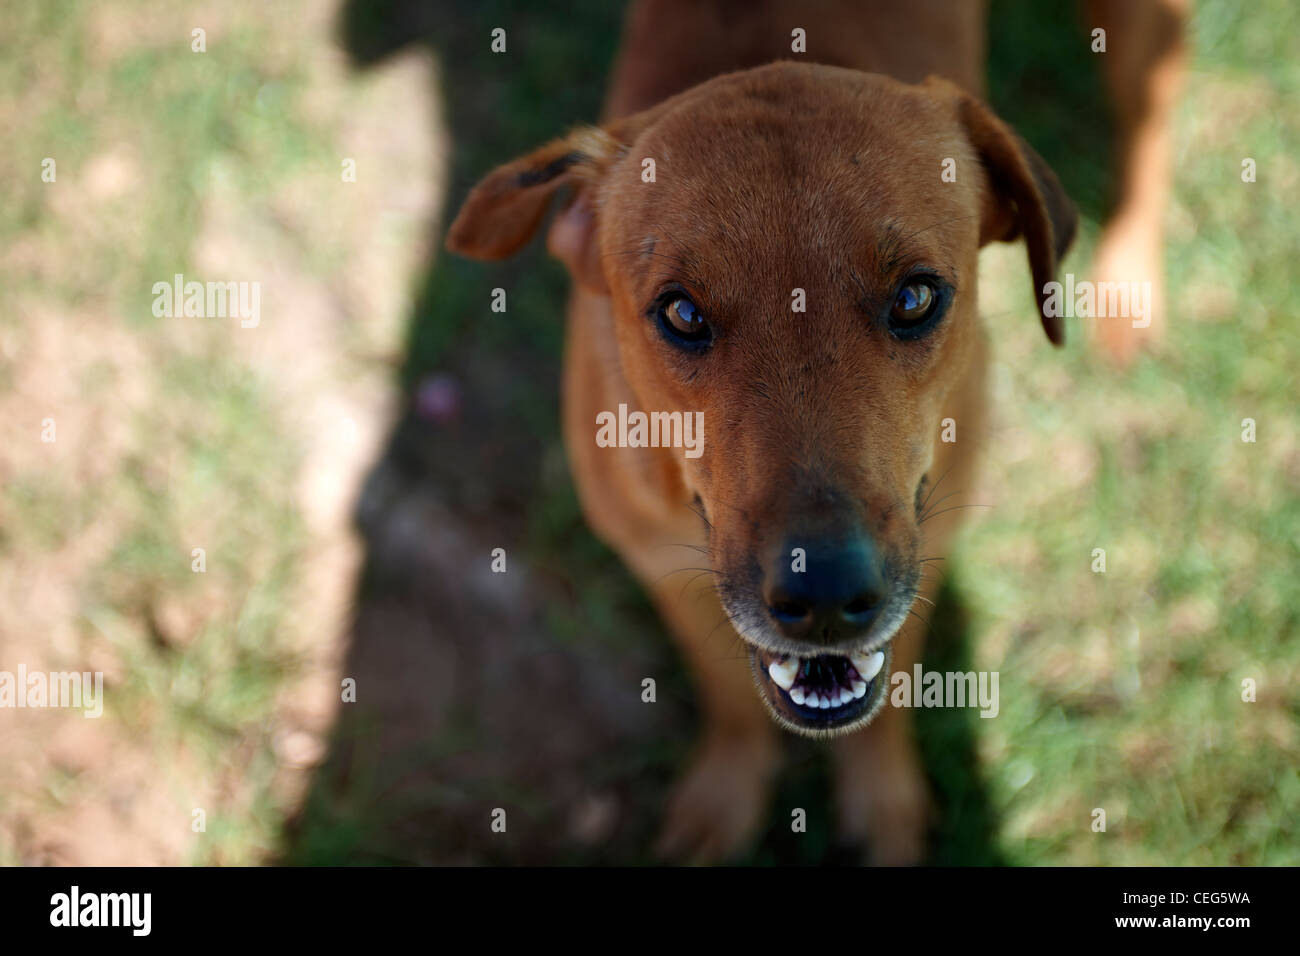 silly dog looking up at viewer Stock Photo